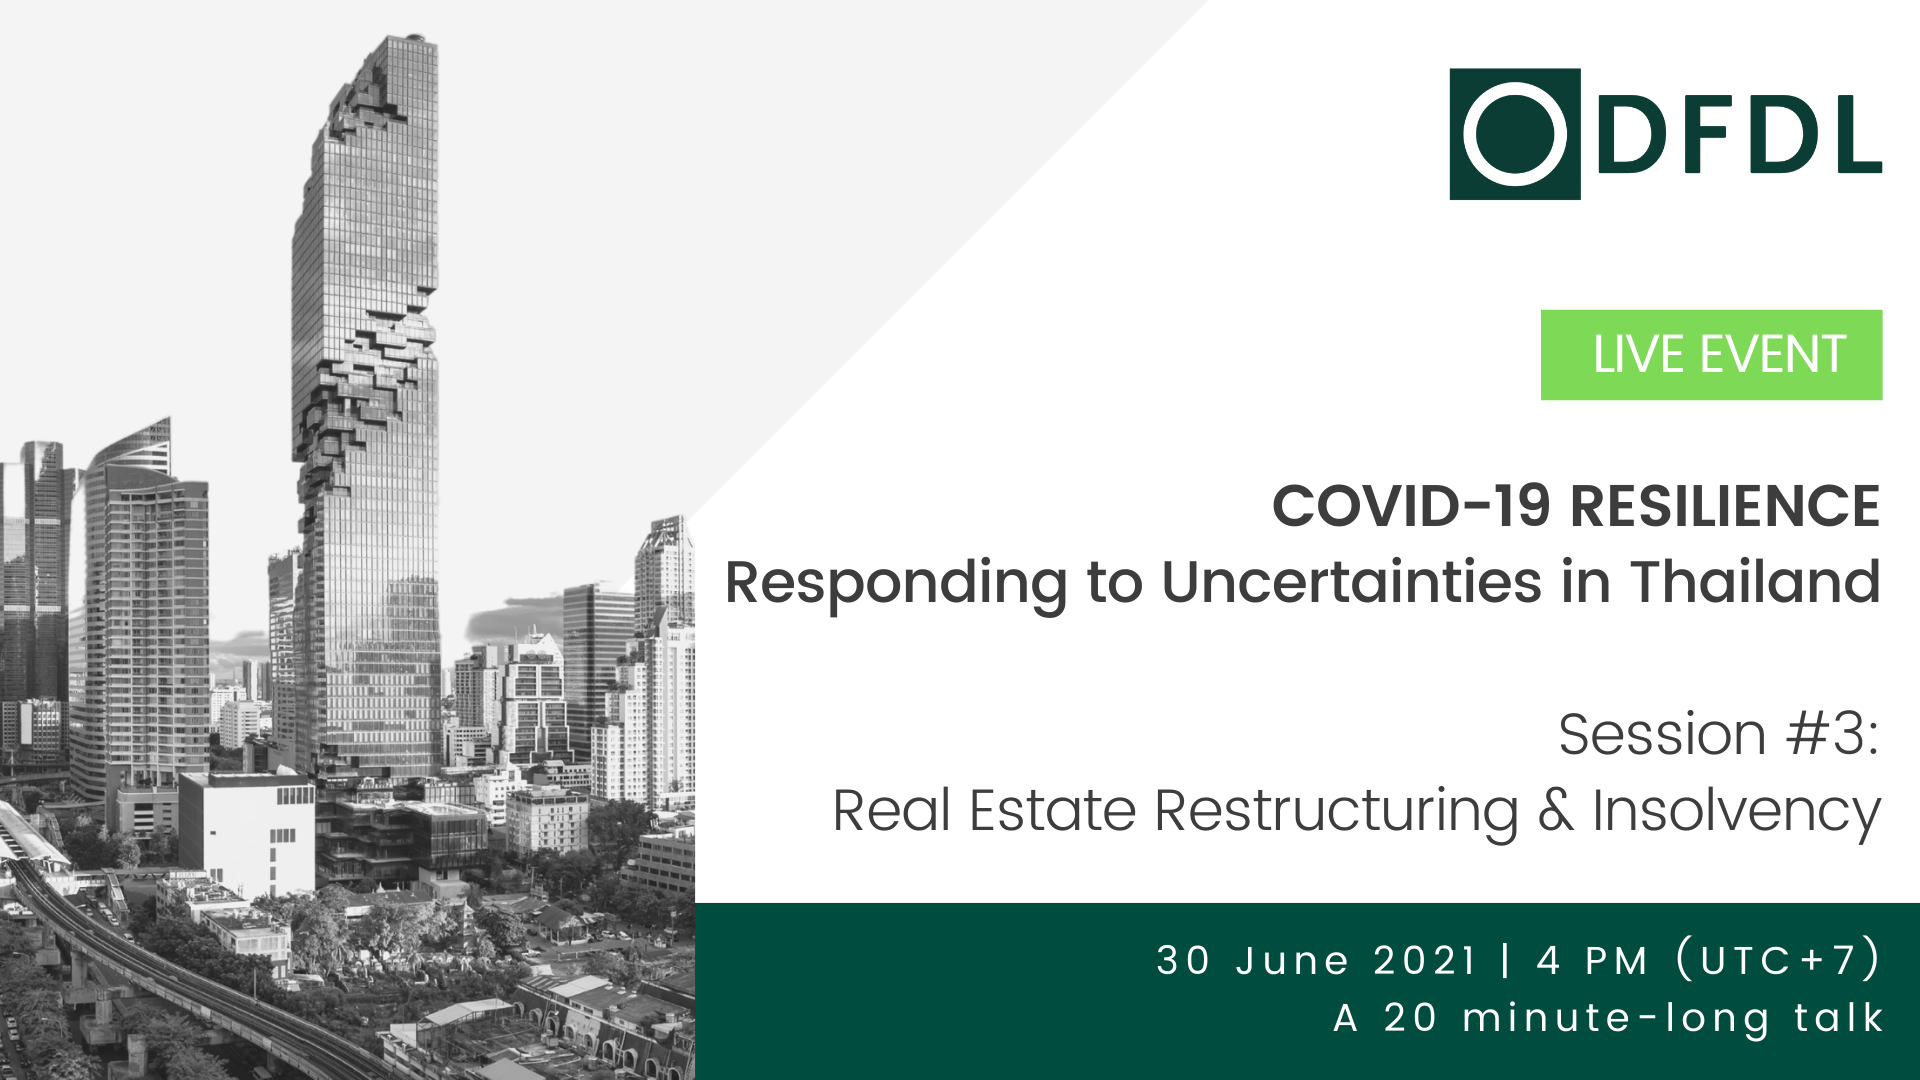 Real Estate Restructuring & Insolvency – COVID-19 Resilience: Responding to Uncertainties in Thailand